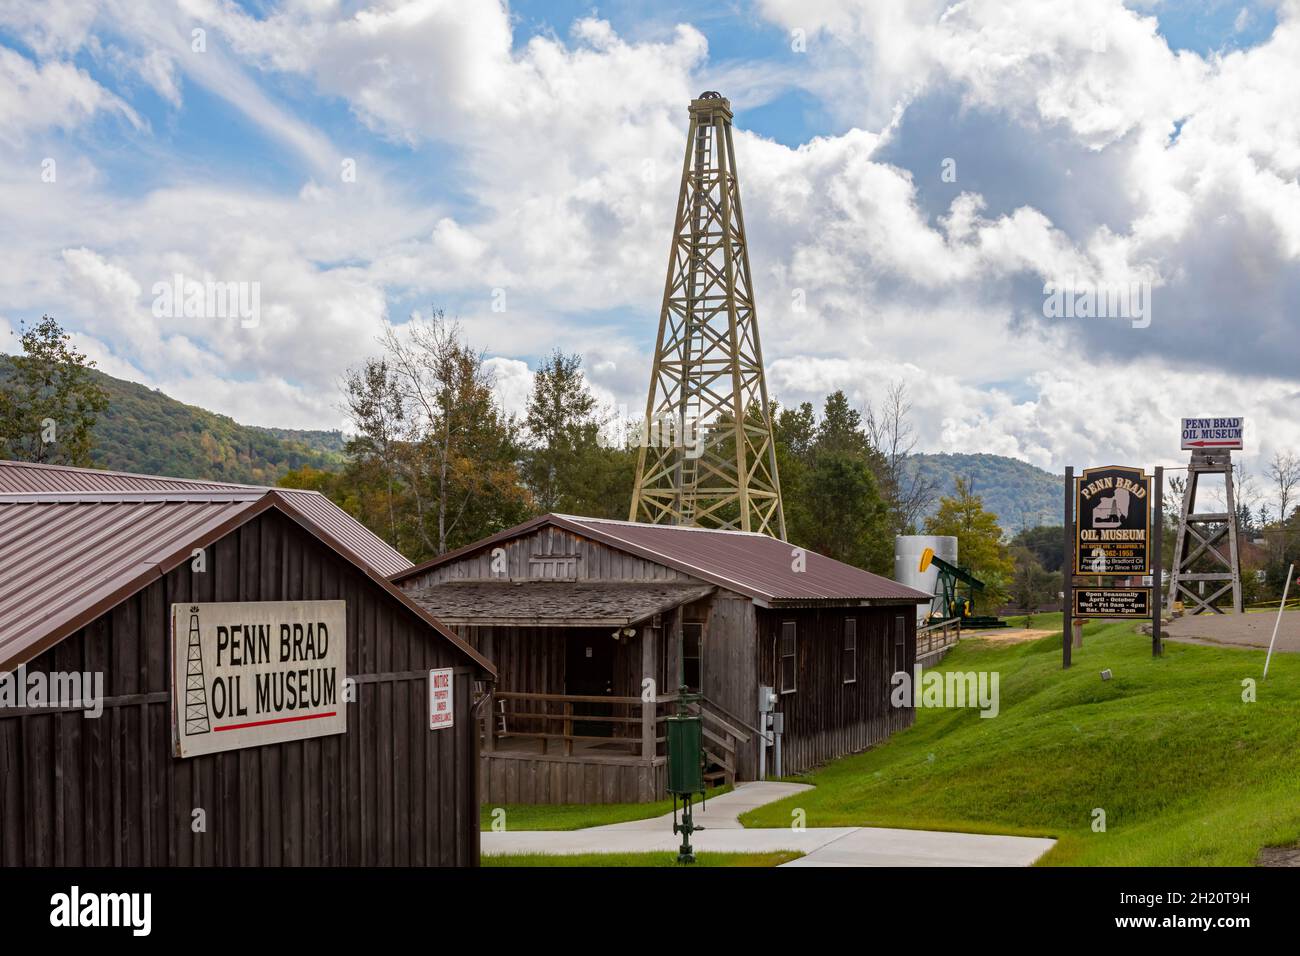 Bradford, Pennsylvania - The Penn Brad Oil Museum tells the story of the Bradford Oil Field, which produced 83% of United States oil with 90,000 wells Stock Photo